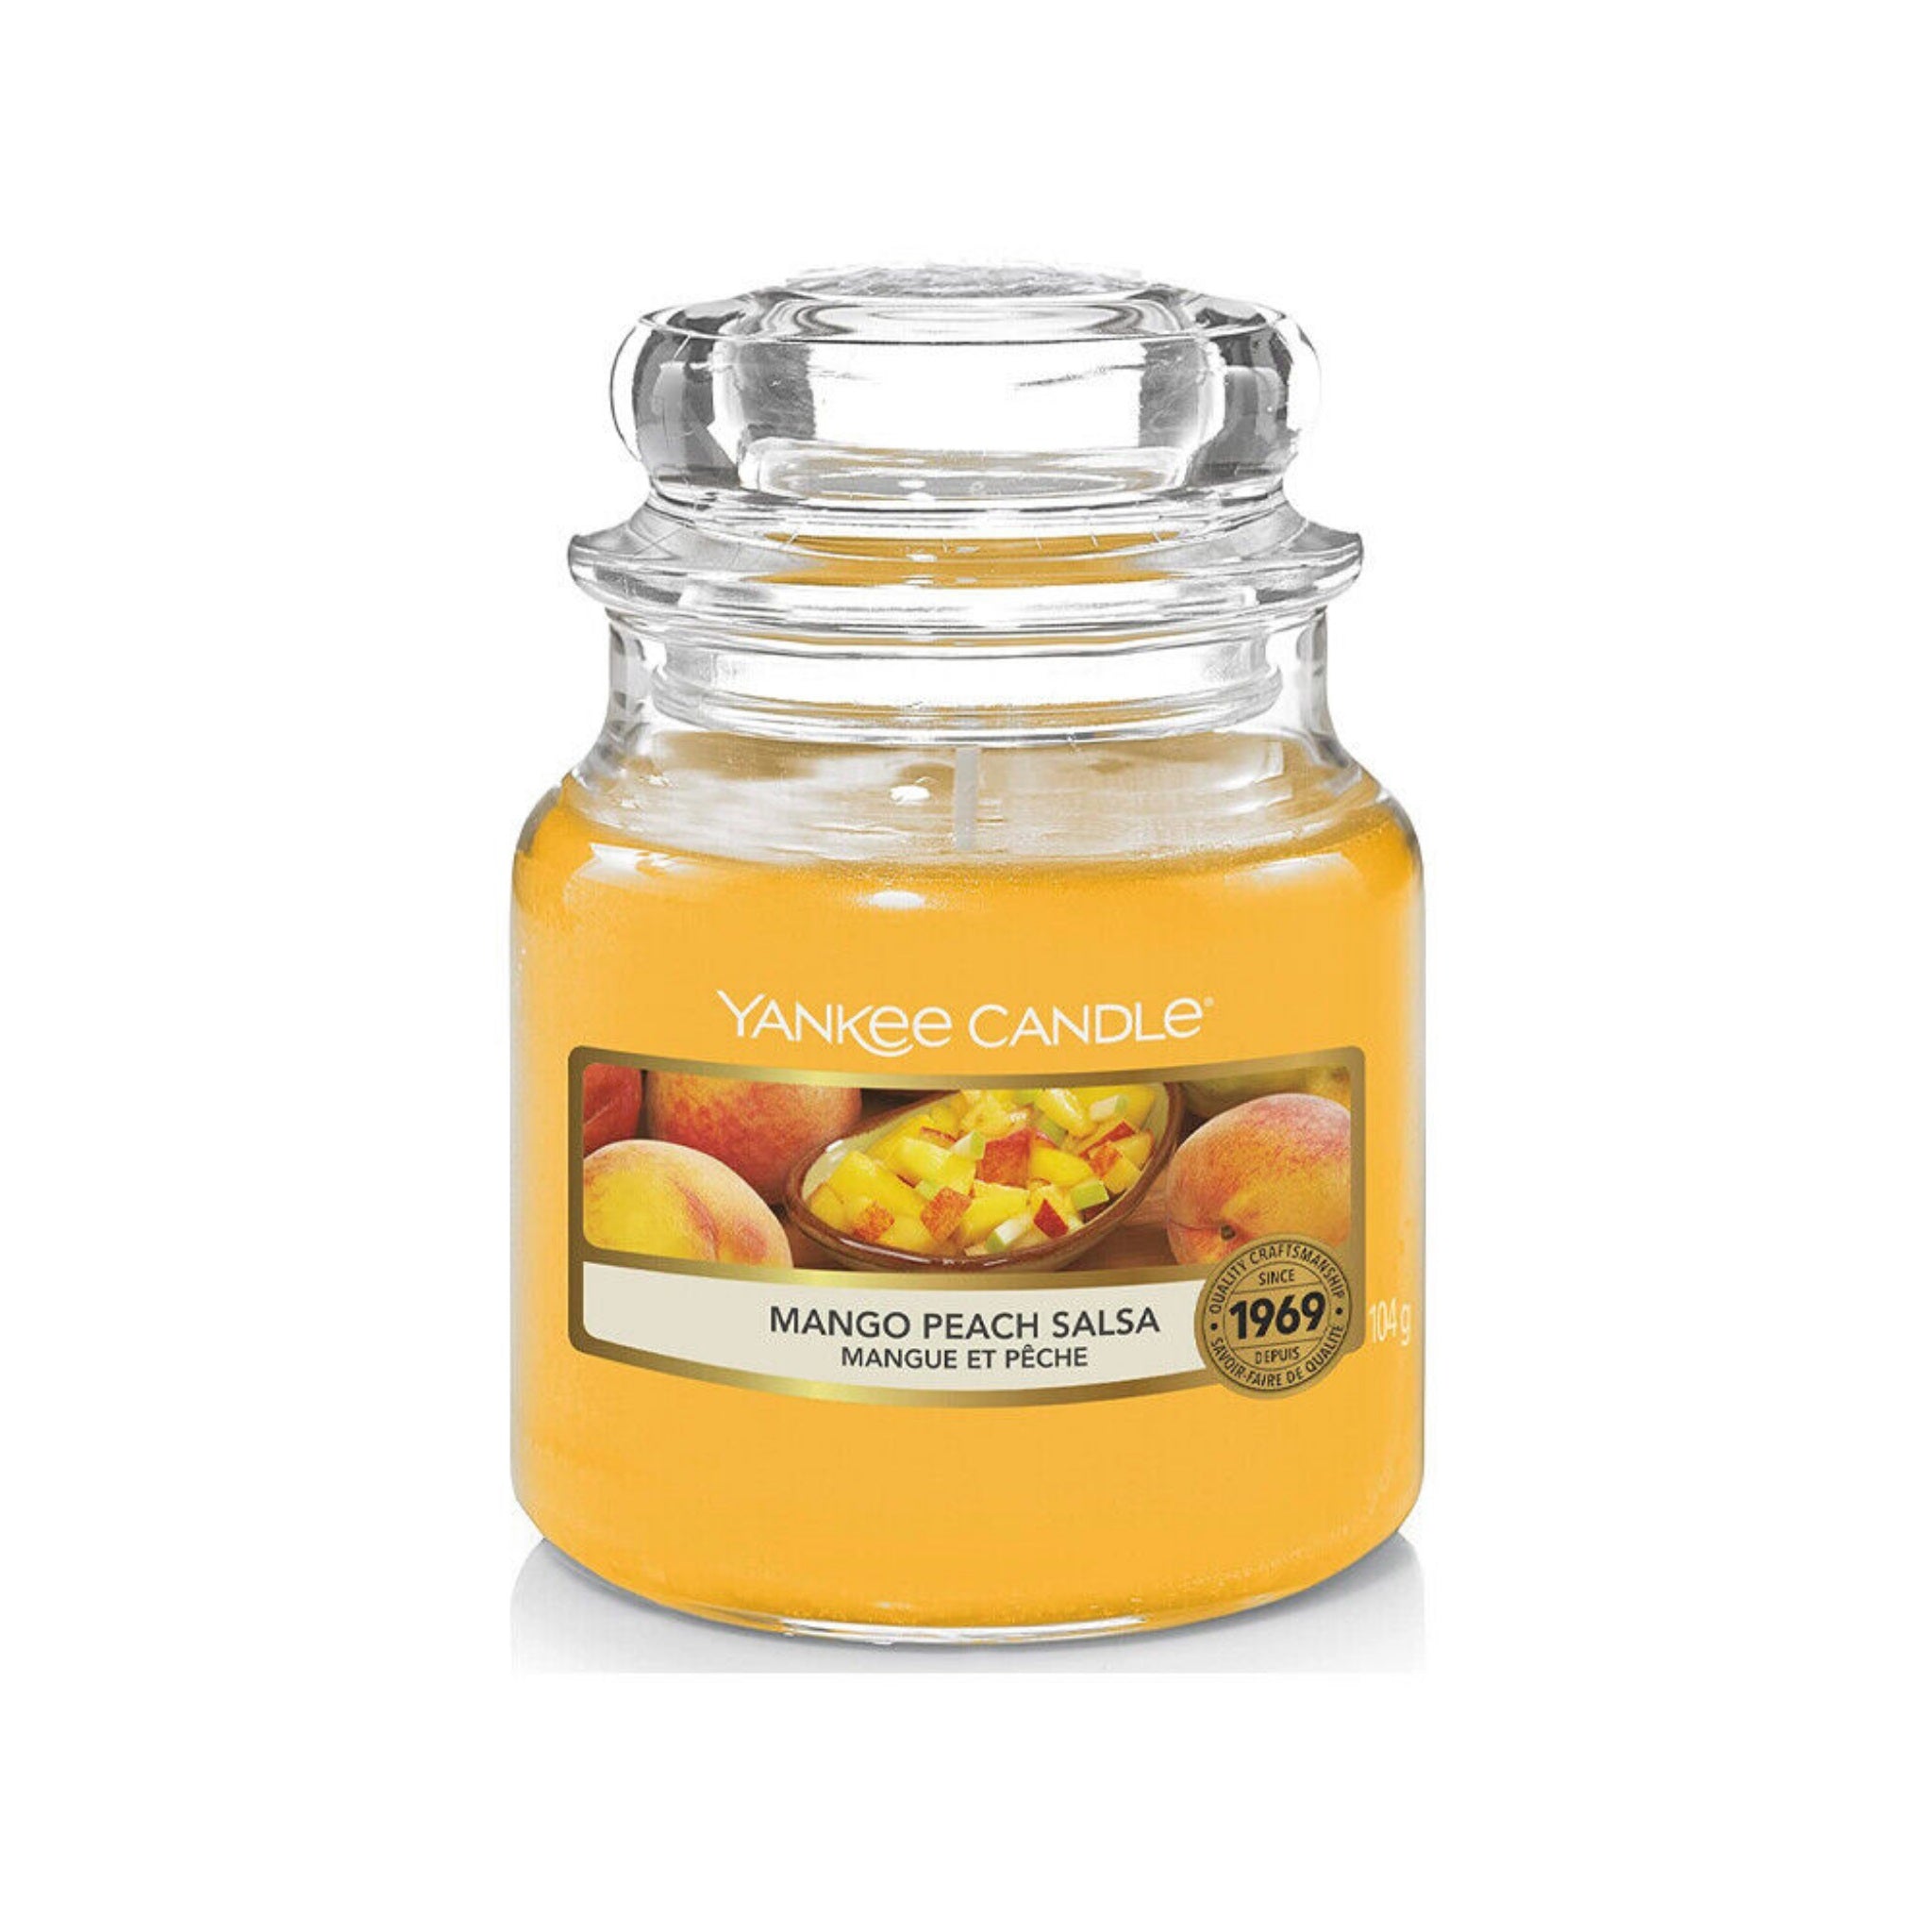 Beclen Harp Large Scented Yankee Wax Melt Small Candle In Glass Jar 104g Assorted Fragrances Home Inspiration